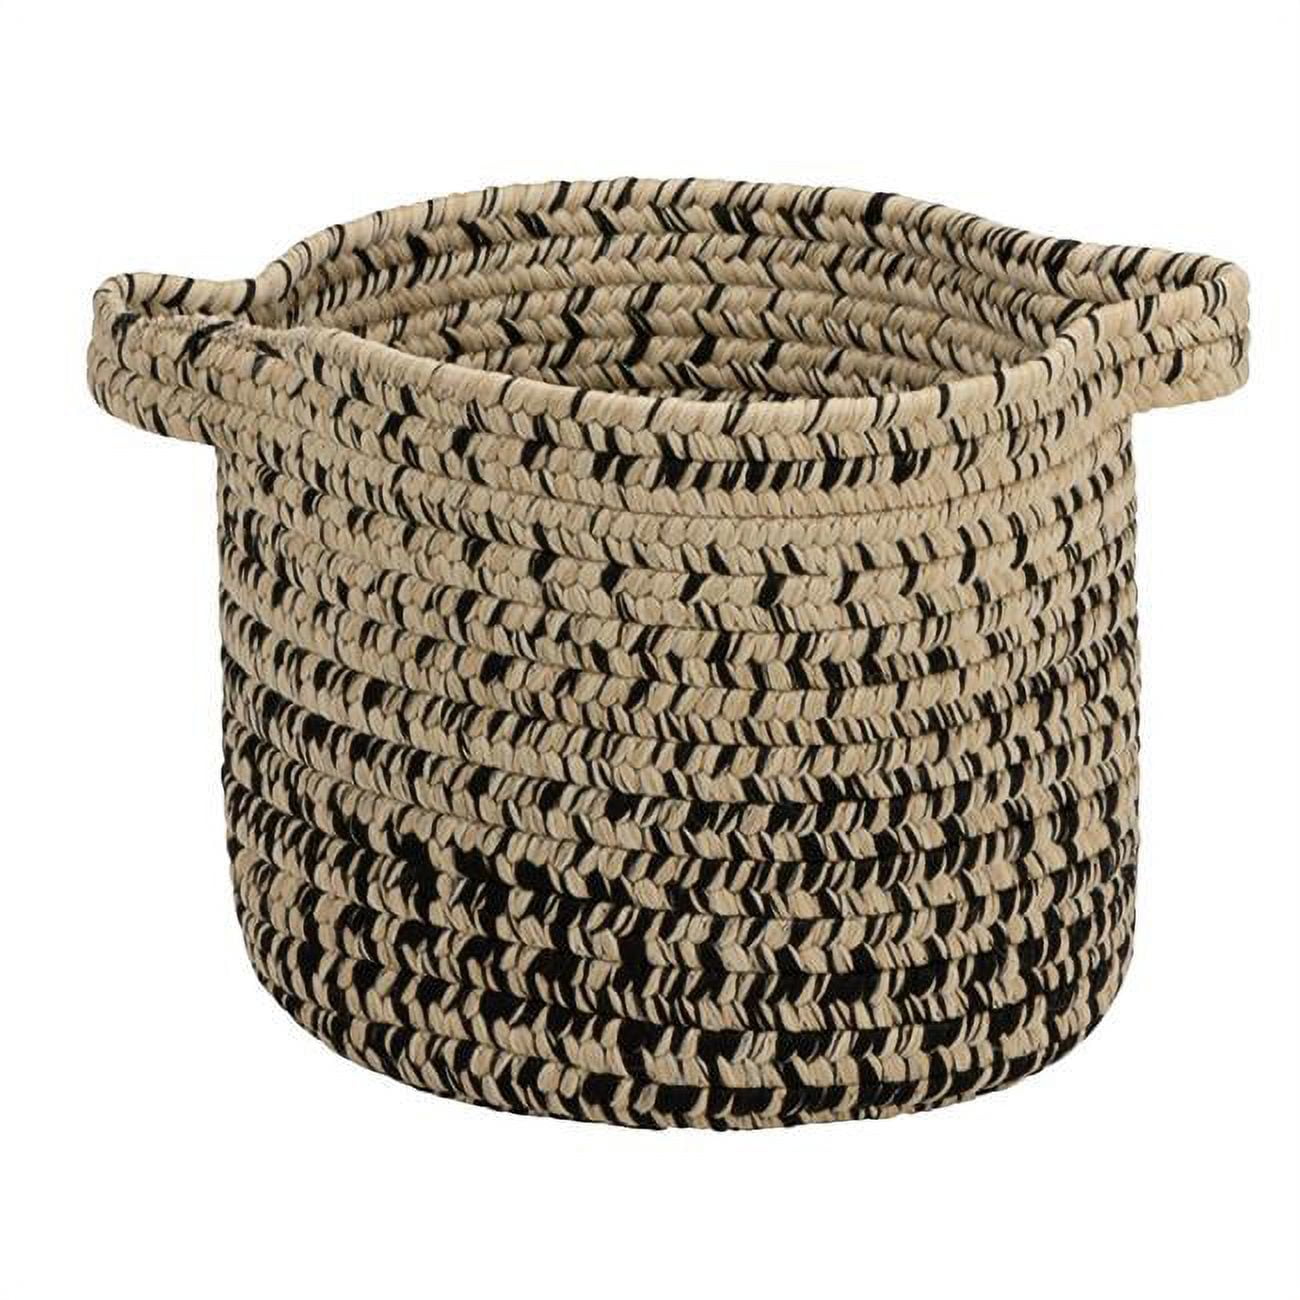 Colonia Mills Mo59 Monet Ombre Basket, Sand & Black - 16 X 16 X 20 In.